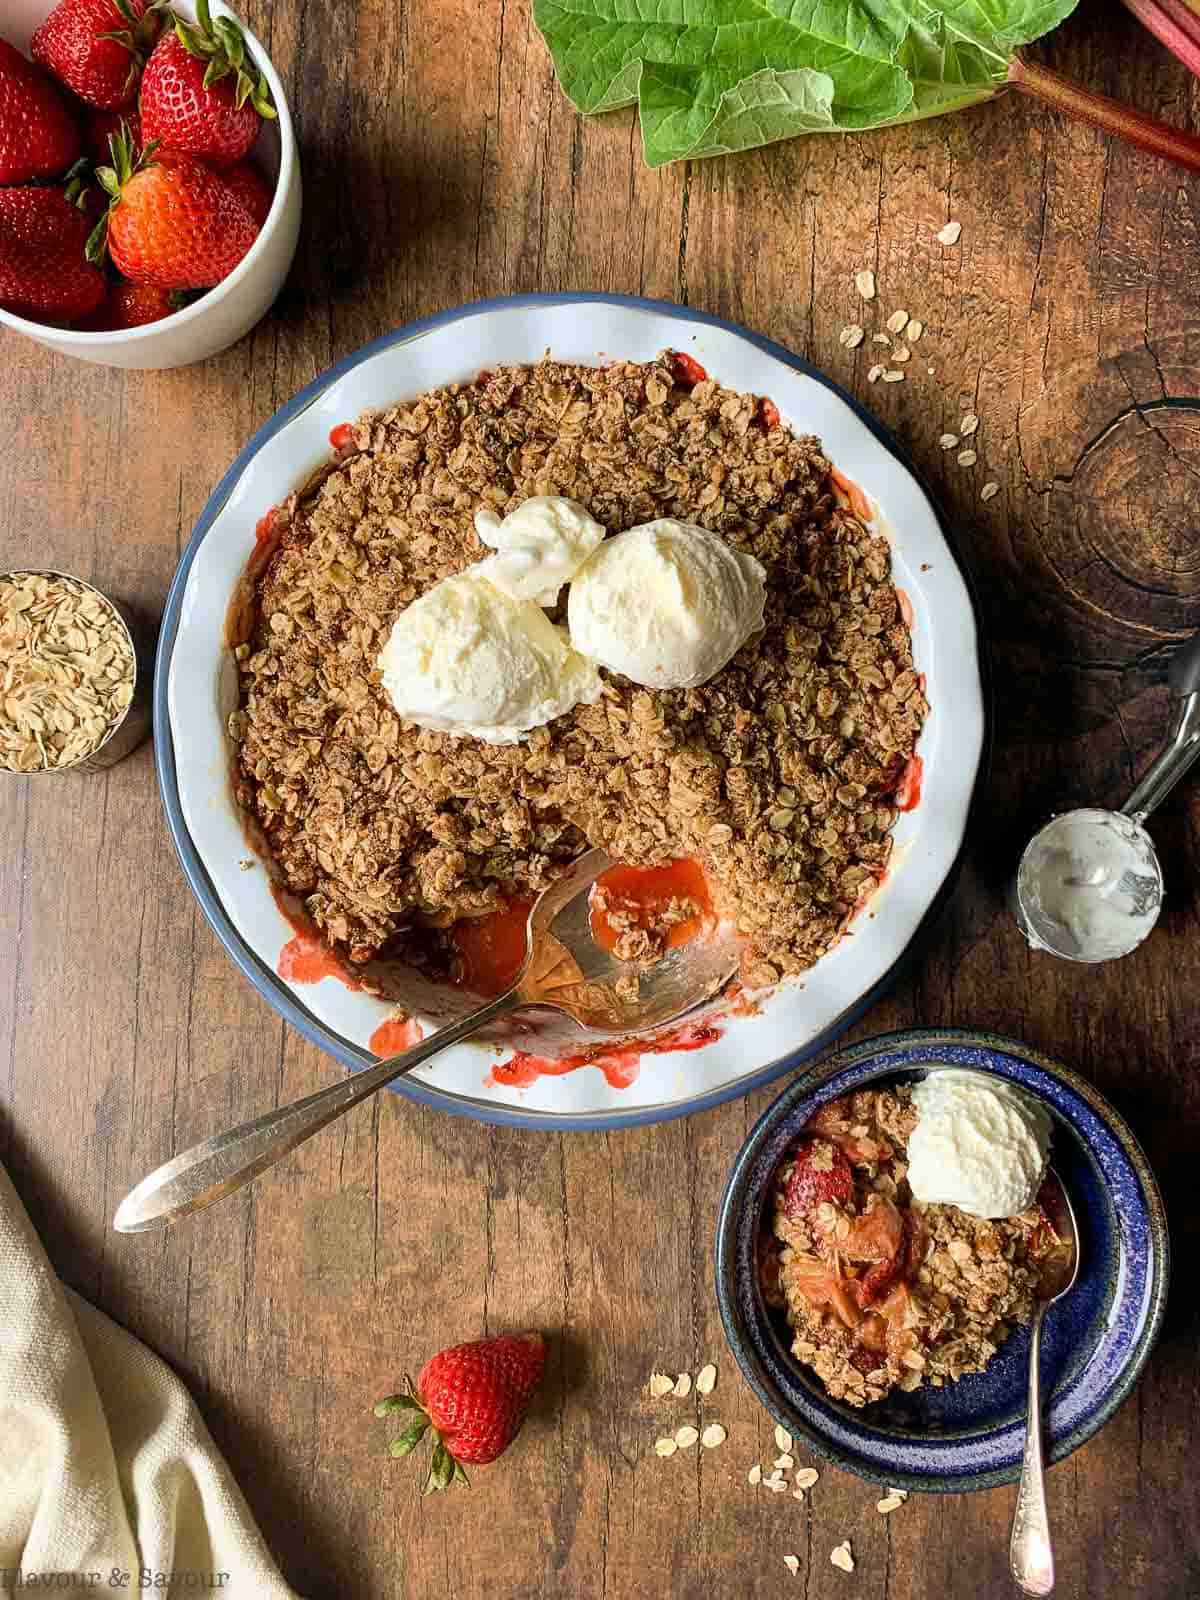 Overhead view of Strawberry Rhubarb Crisp with ice cream and fresh strawberries.